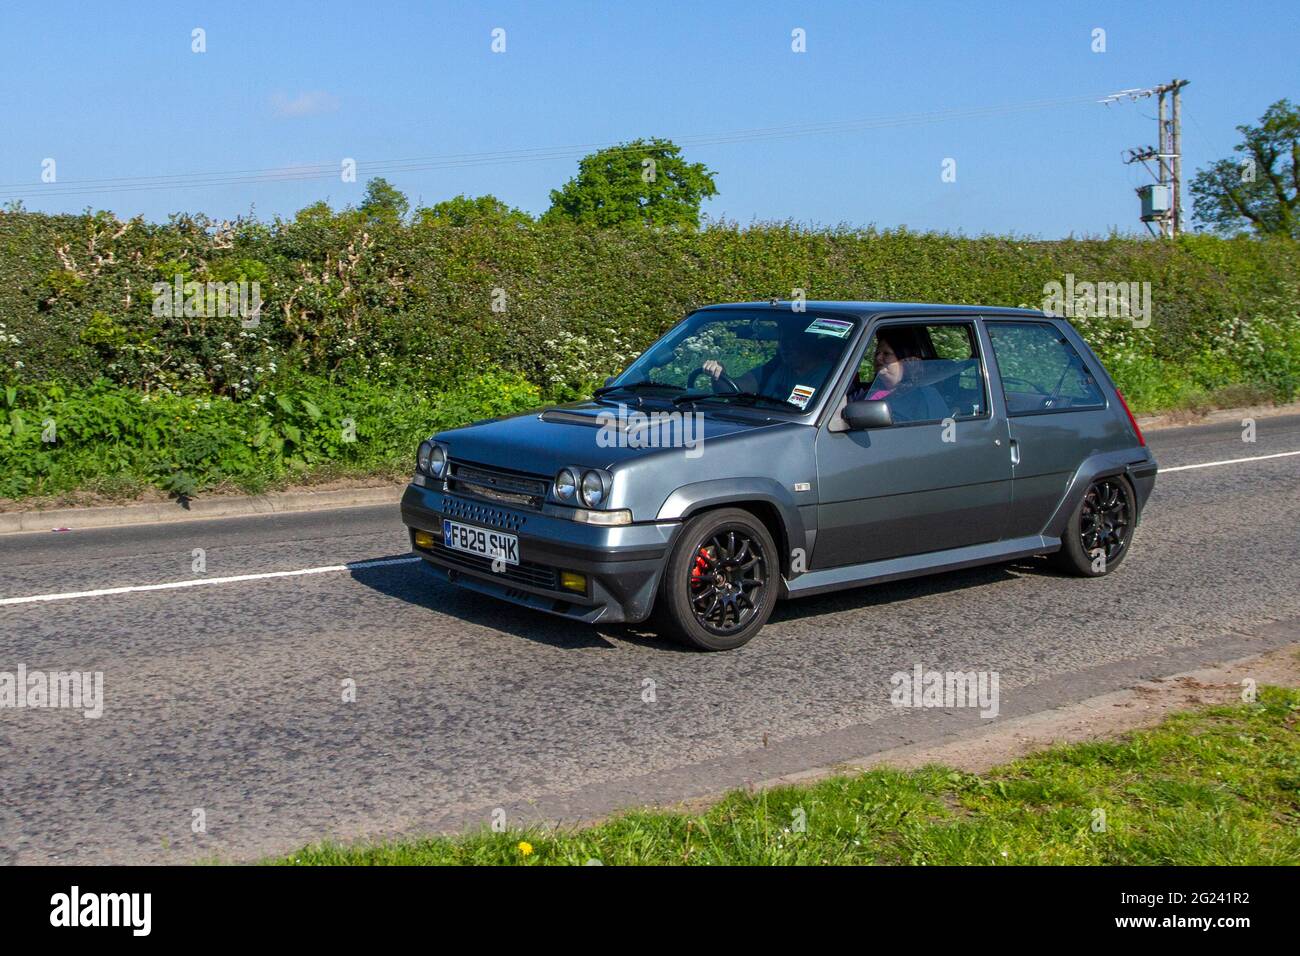 1989 grey Renaut 5 Gt Turbo 2397cc 2dr petrol hatchback, en-route to Caperstorne Hall classic car event UK Stock Photo